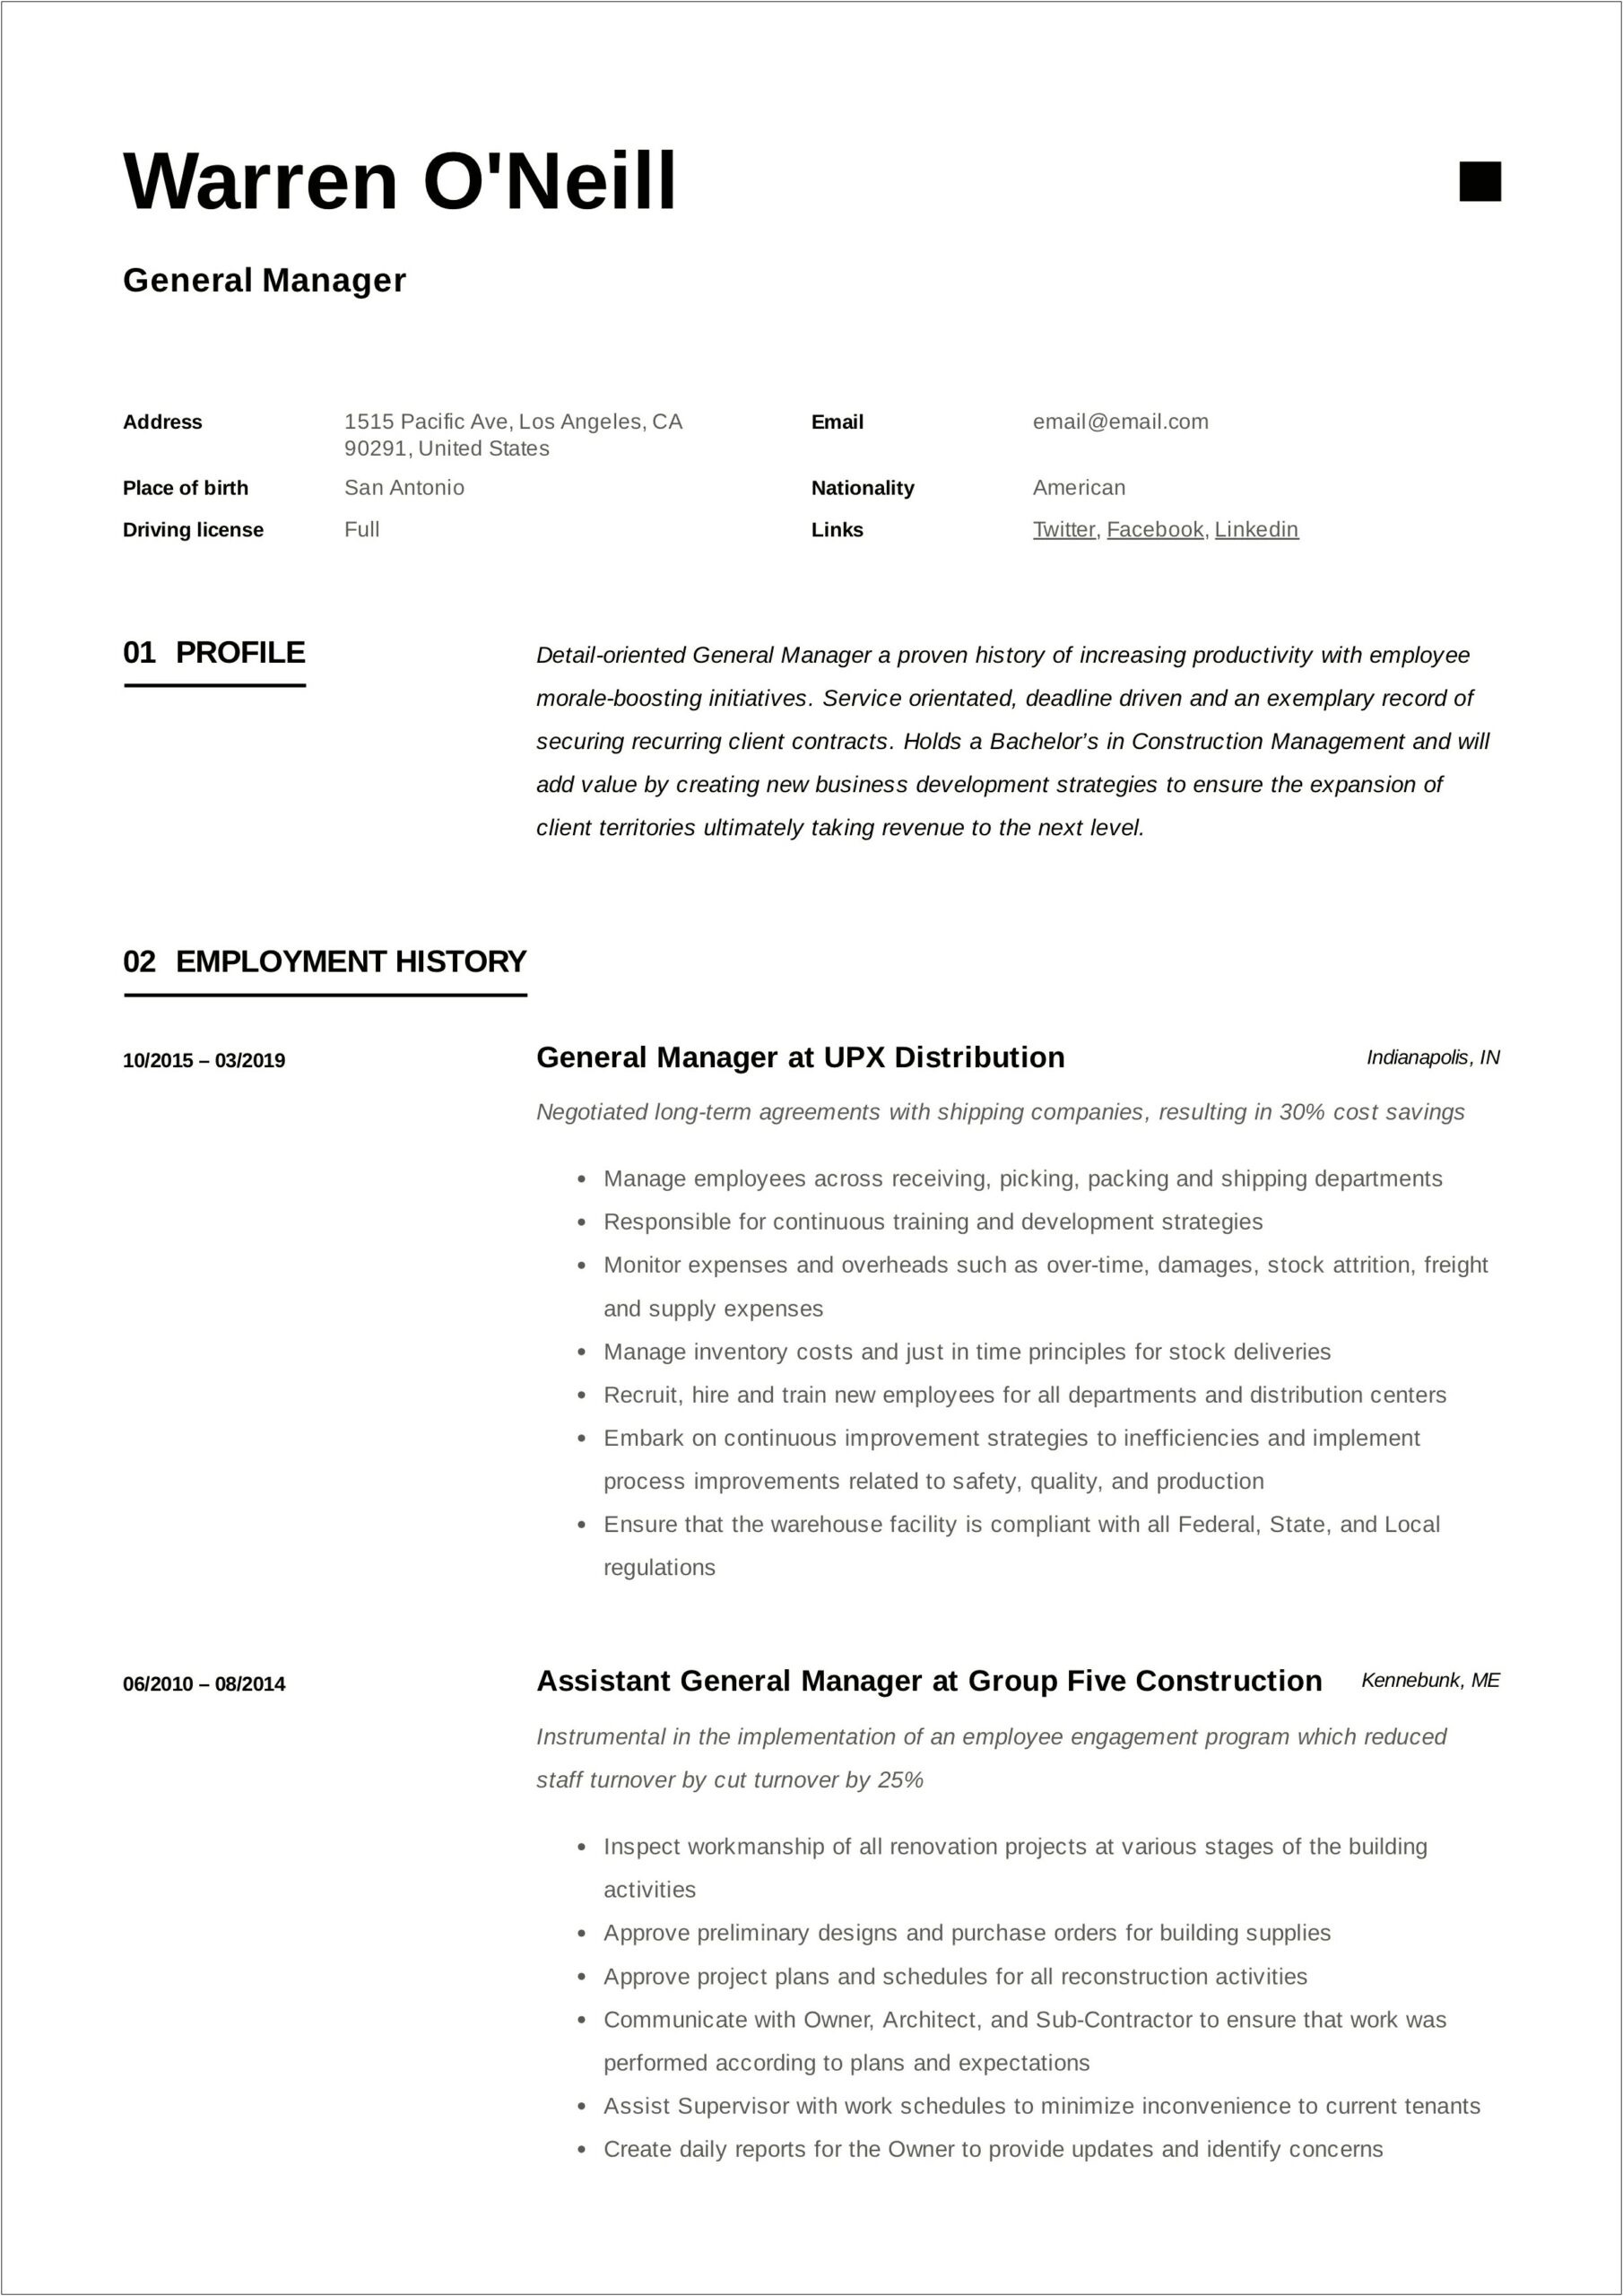 Resume For Assistant General Manager Of A Gym